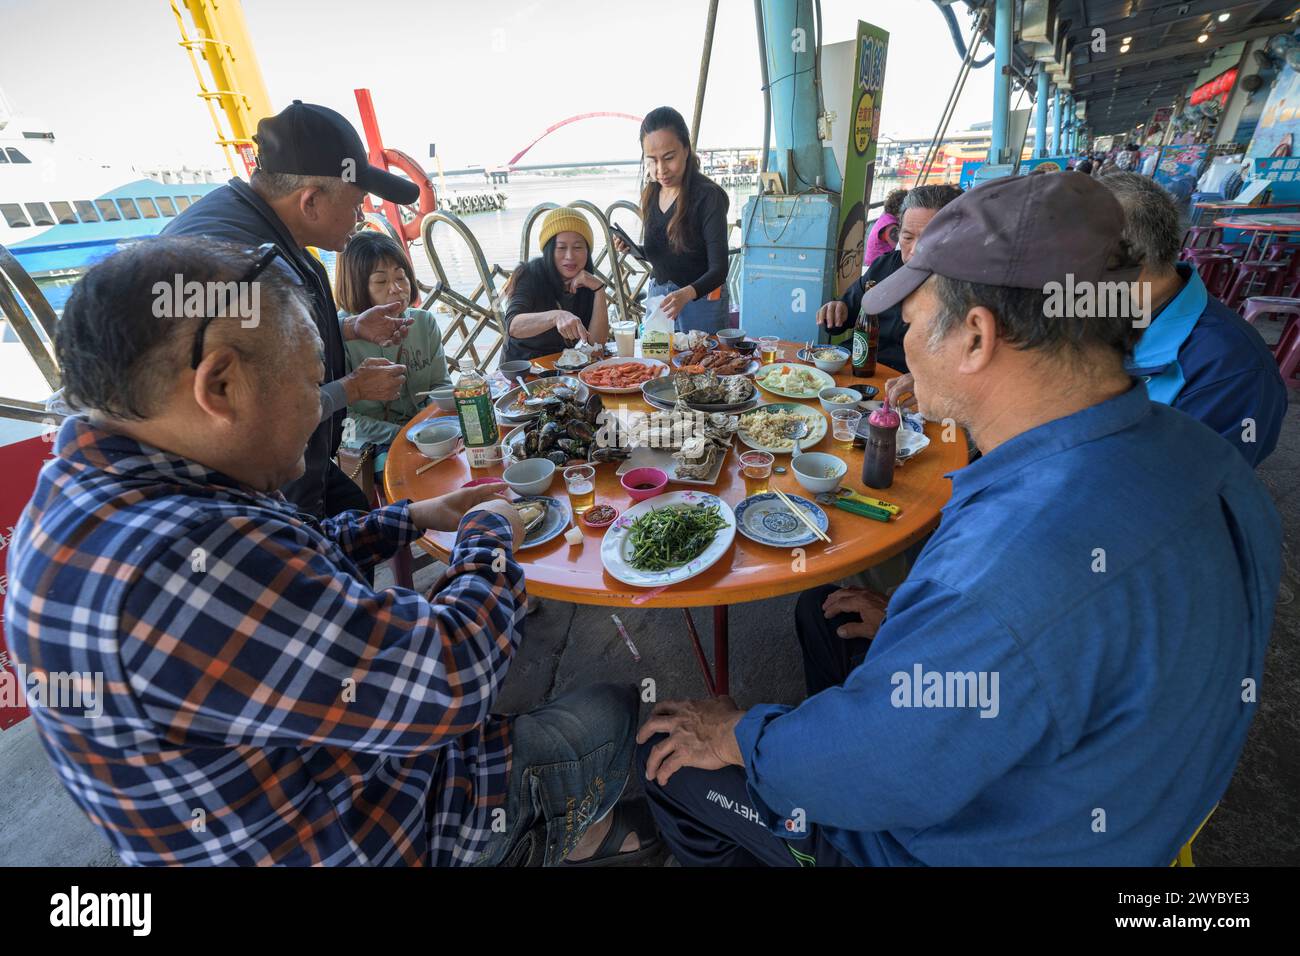 A lively group of friends or family sharing a variety of seafood dishes at an outdoor table by the seaside Stock Photo